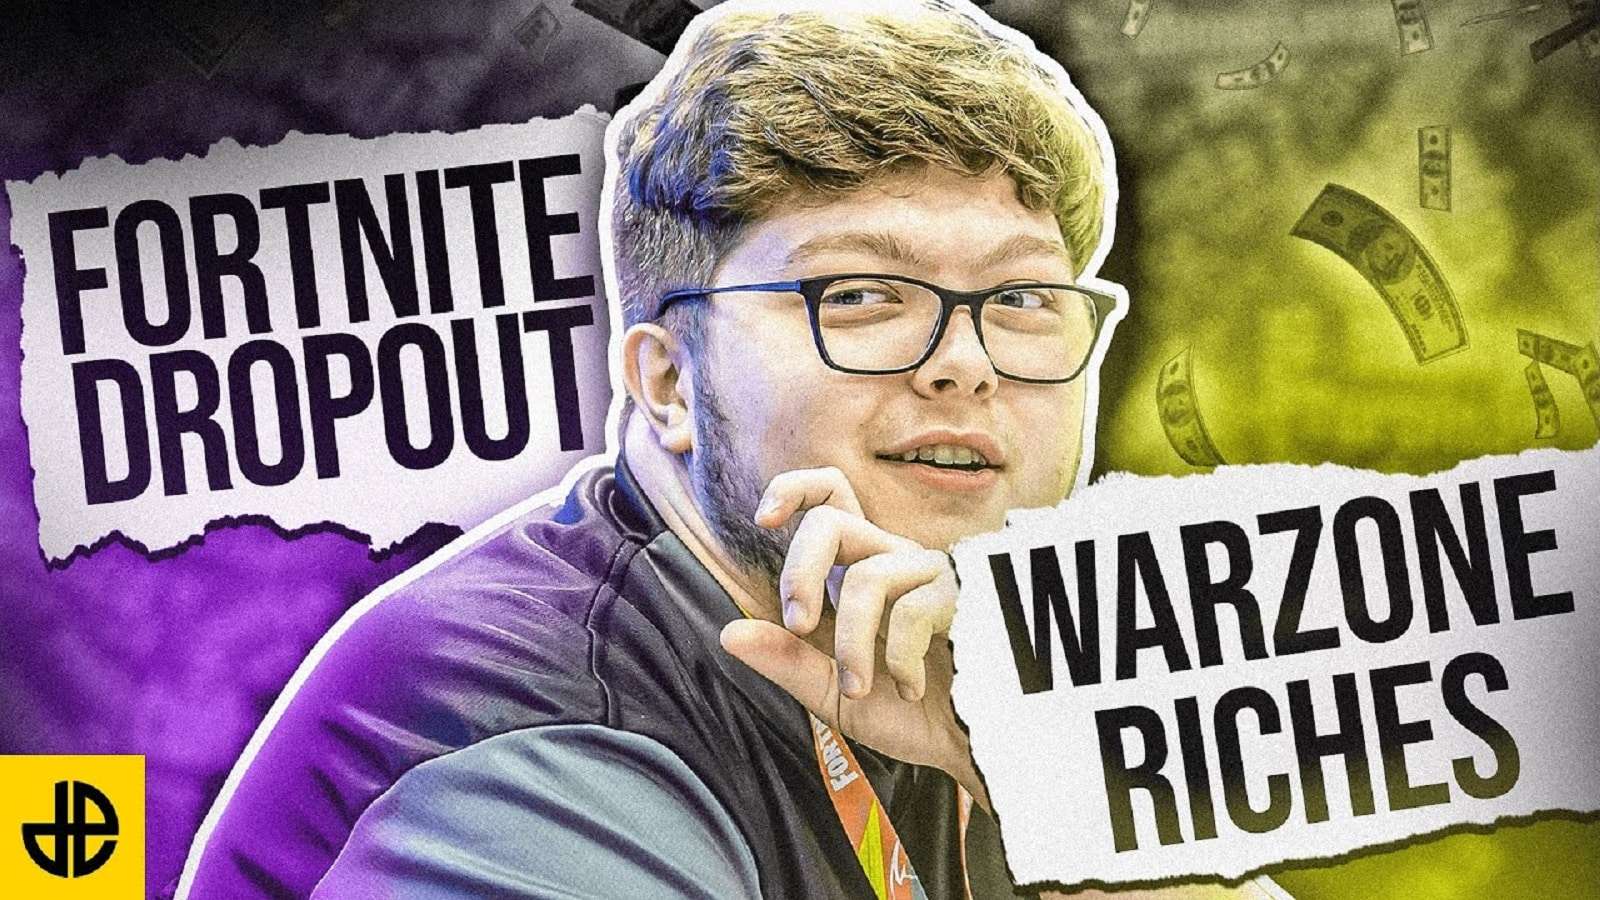 How a Fortnite Dropout Became Warzone's Richest Player YouTube Thumbnail